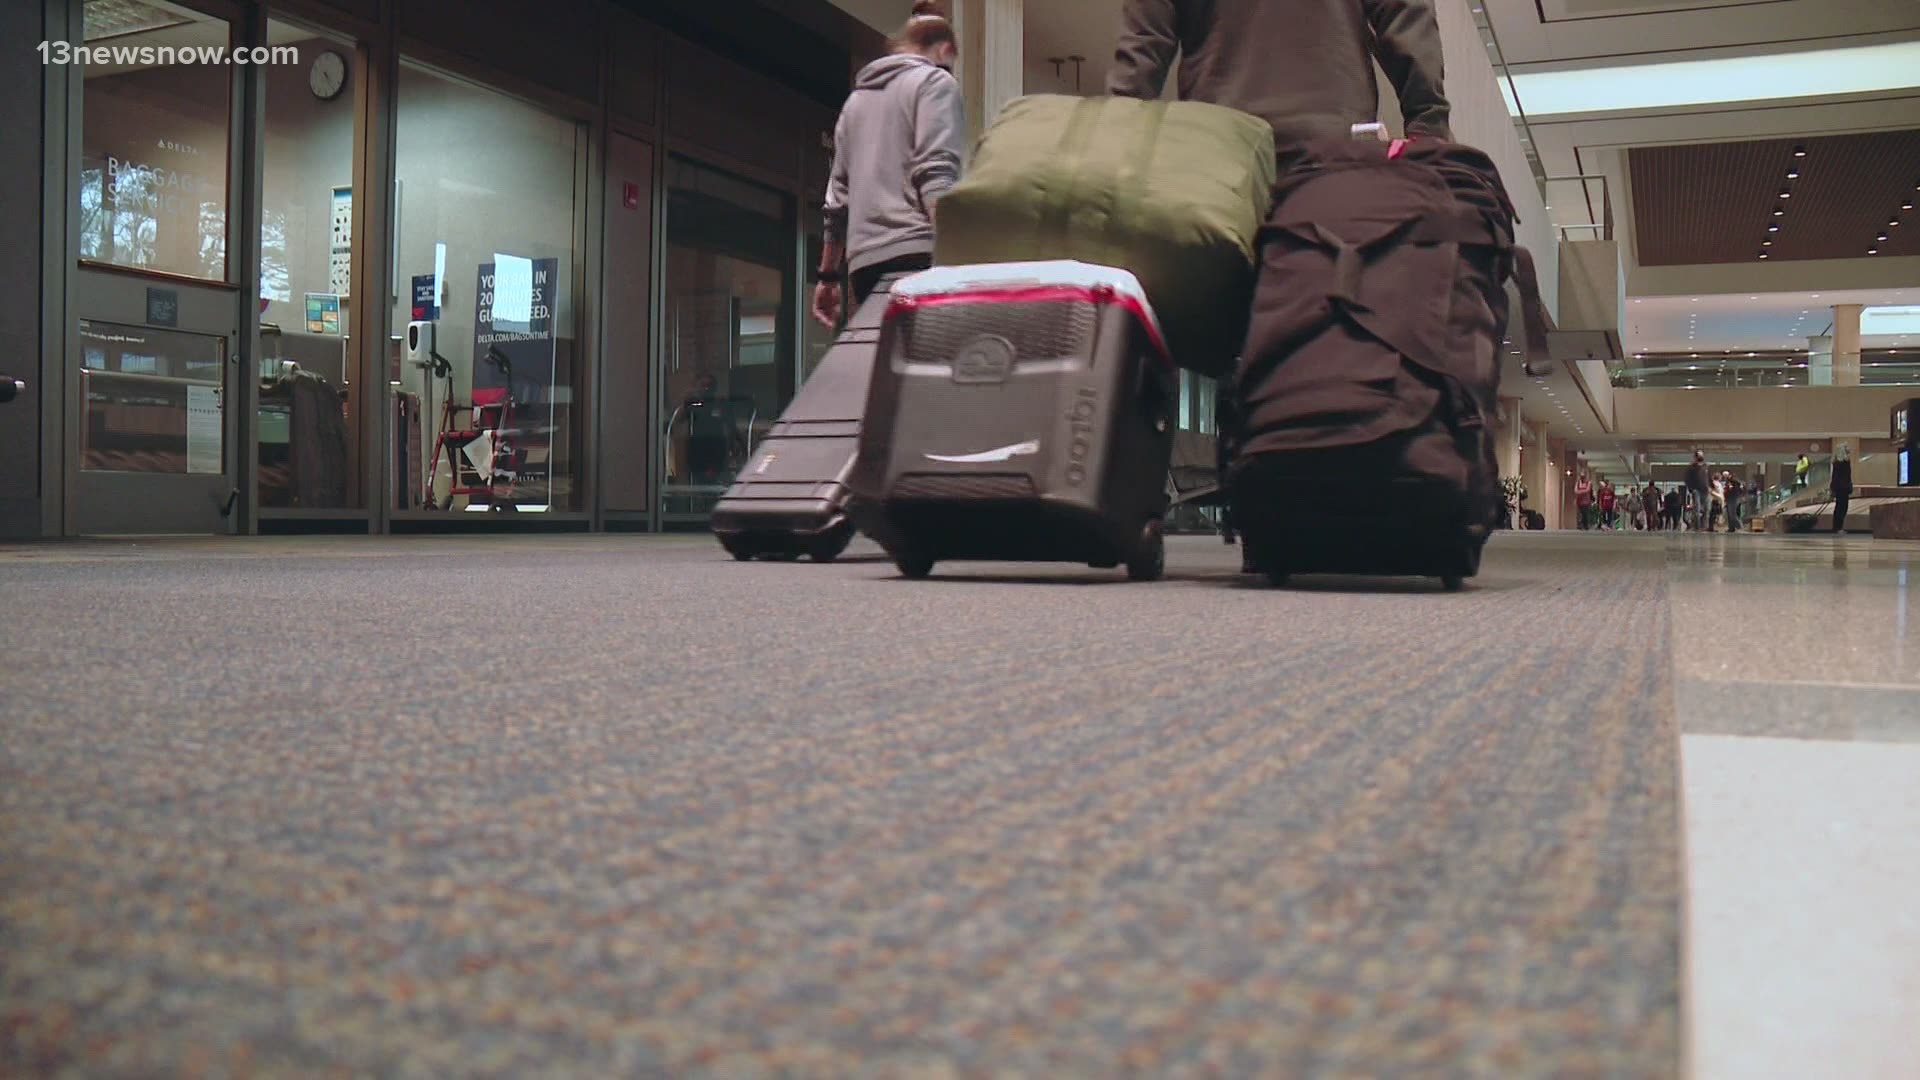 Thousands of flyers flew back home to Hampton Roads.